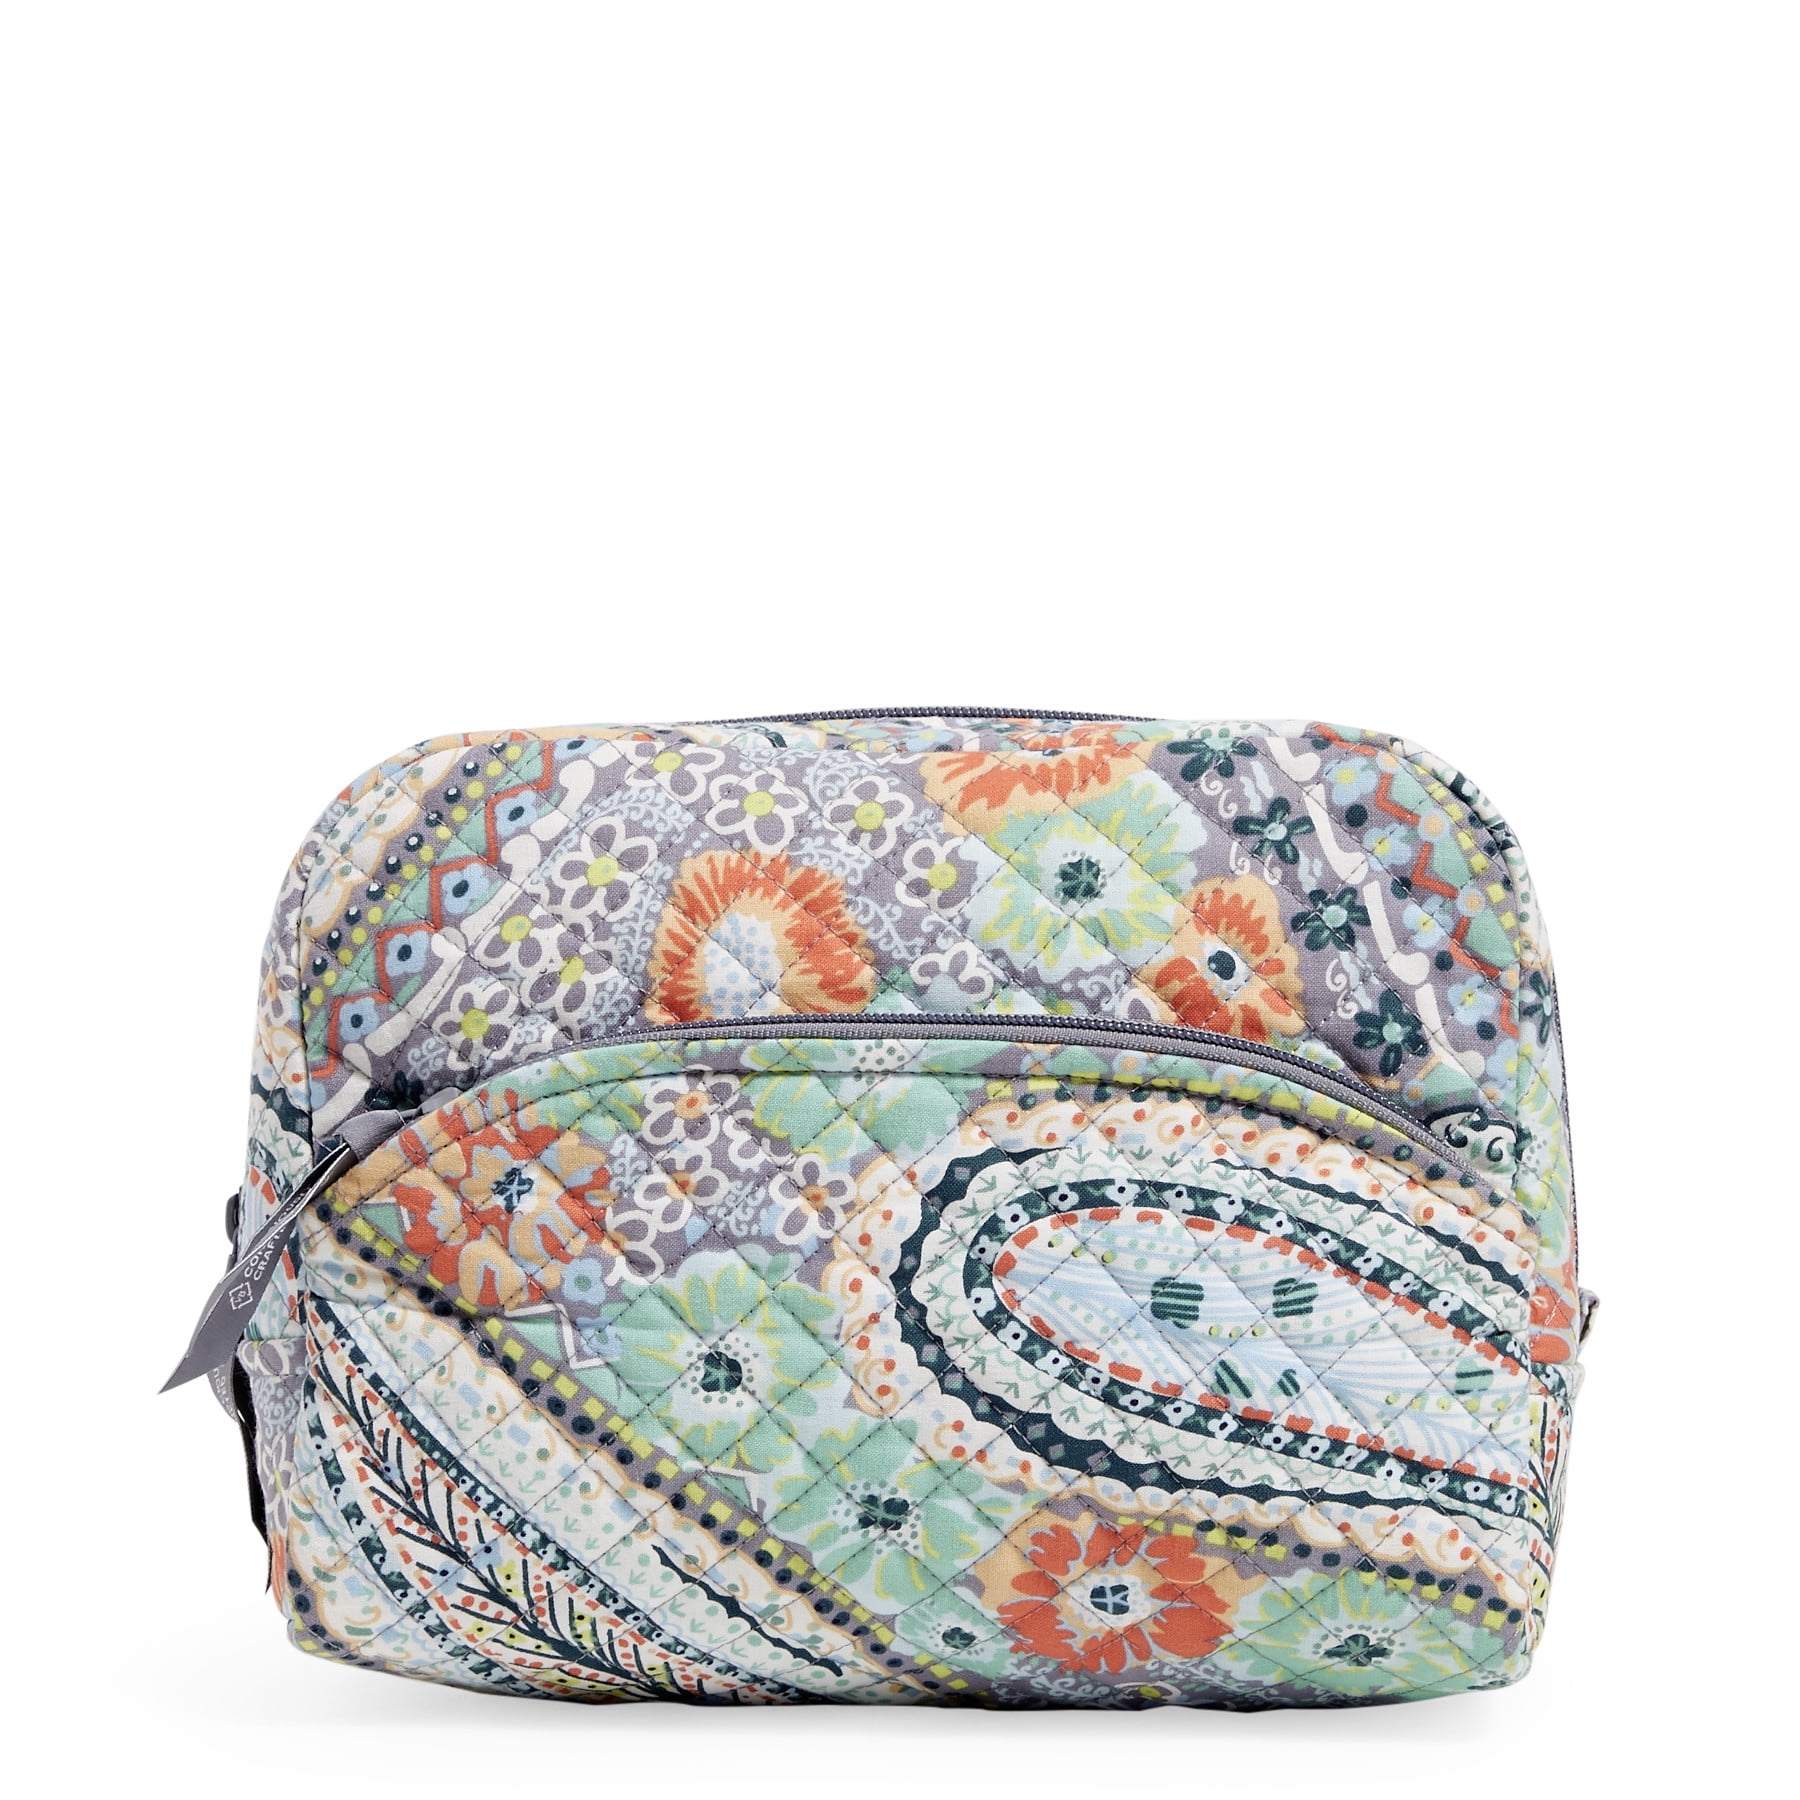 Vera Bradley Women's Recycled Cotton Large Cosmetic Bag Citrus Paisley ...